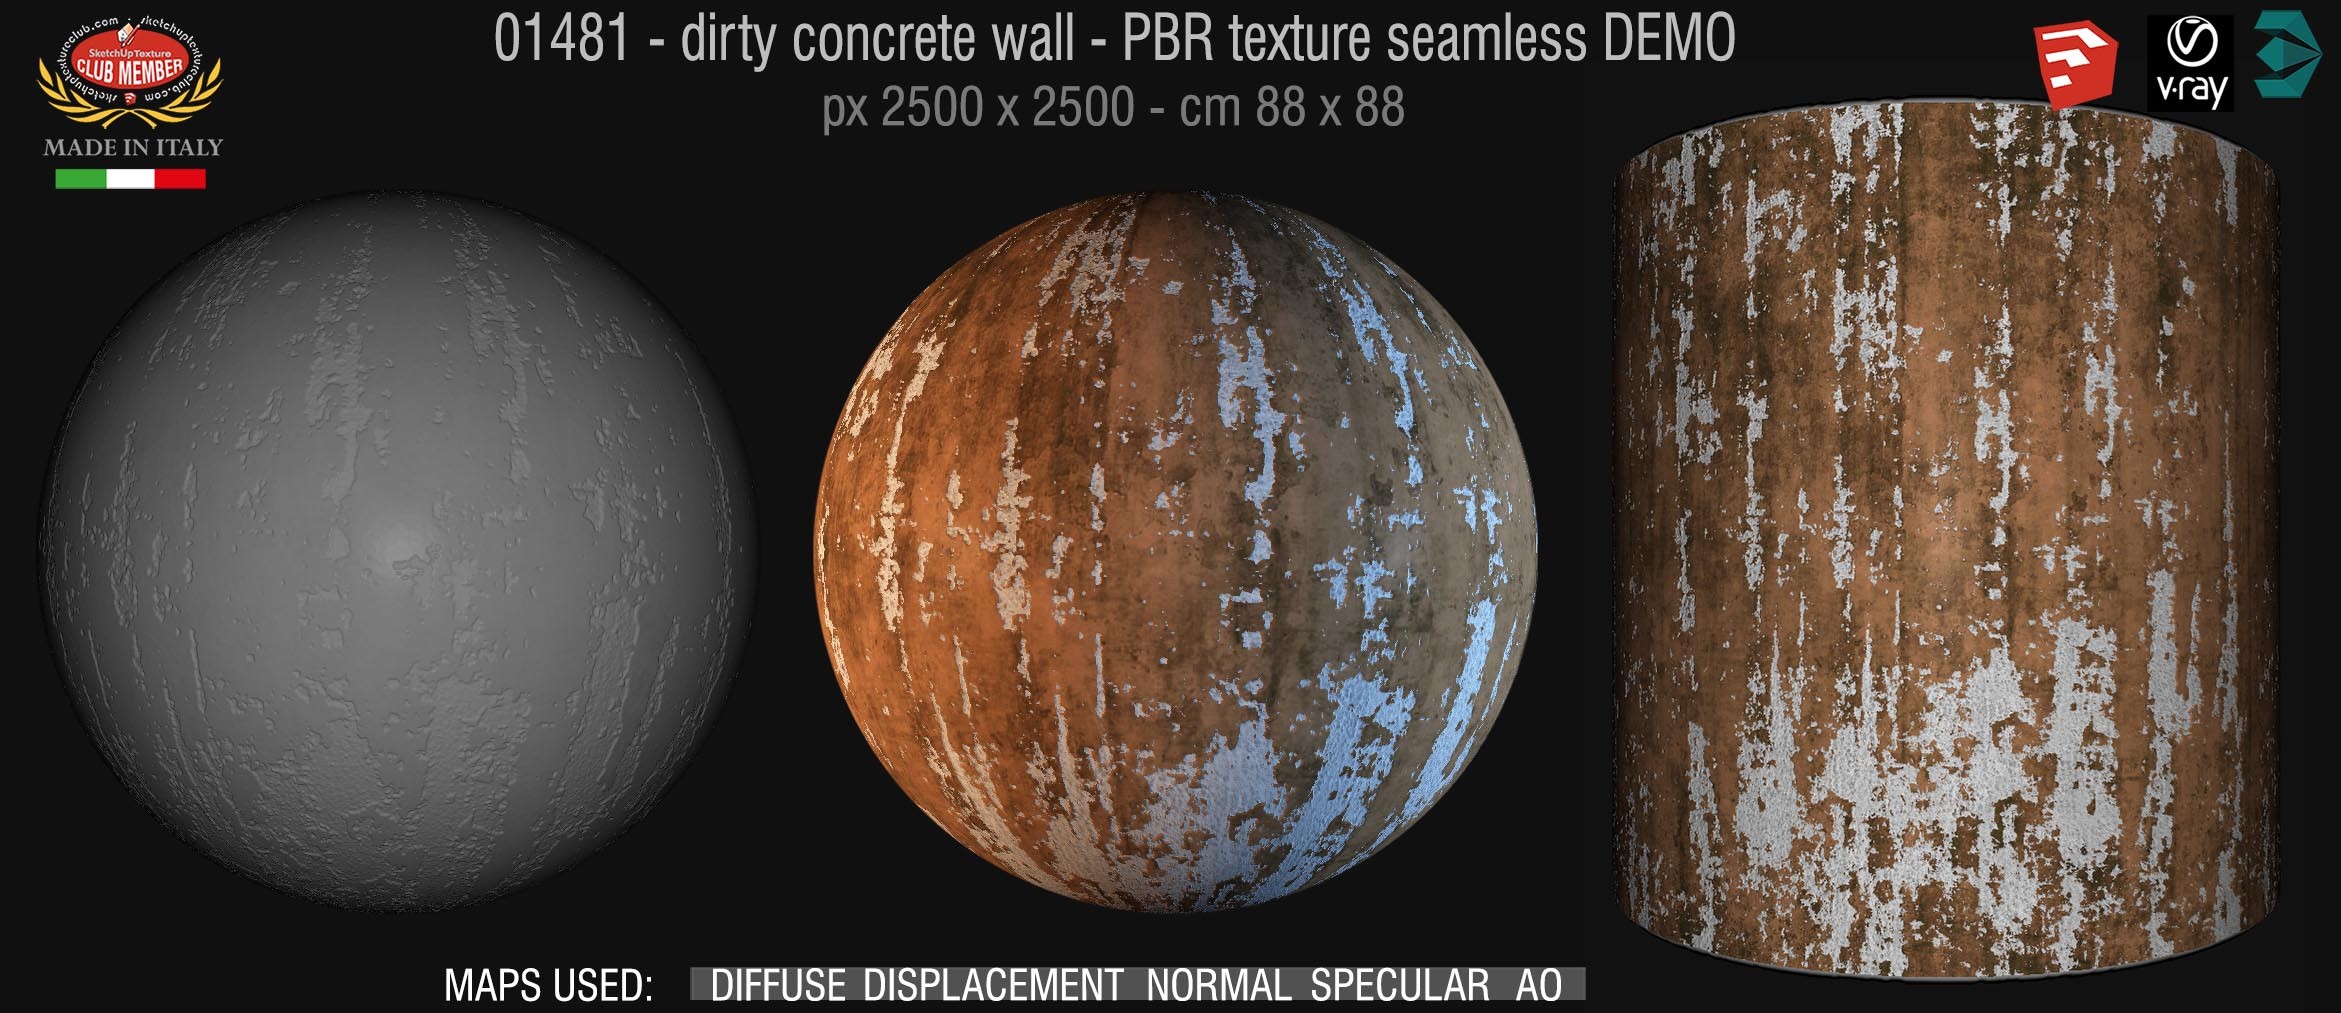 01481 Concrete bare dirty wall PBR texture seamless DEMO